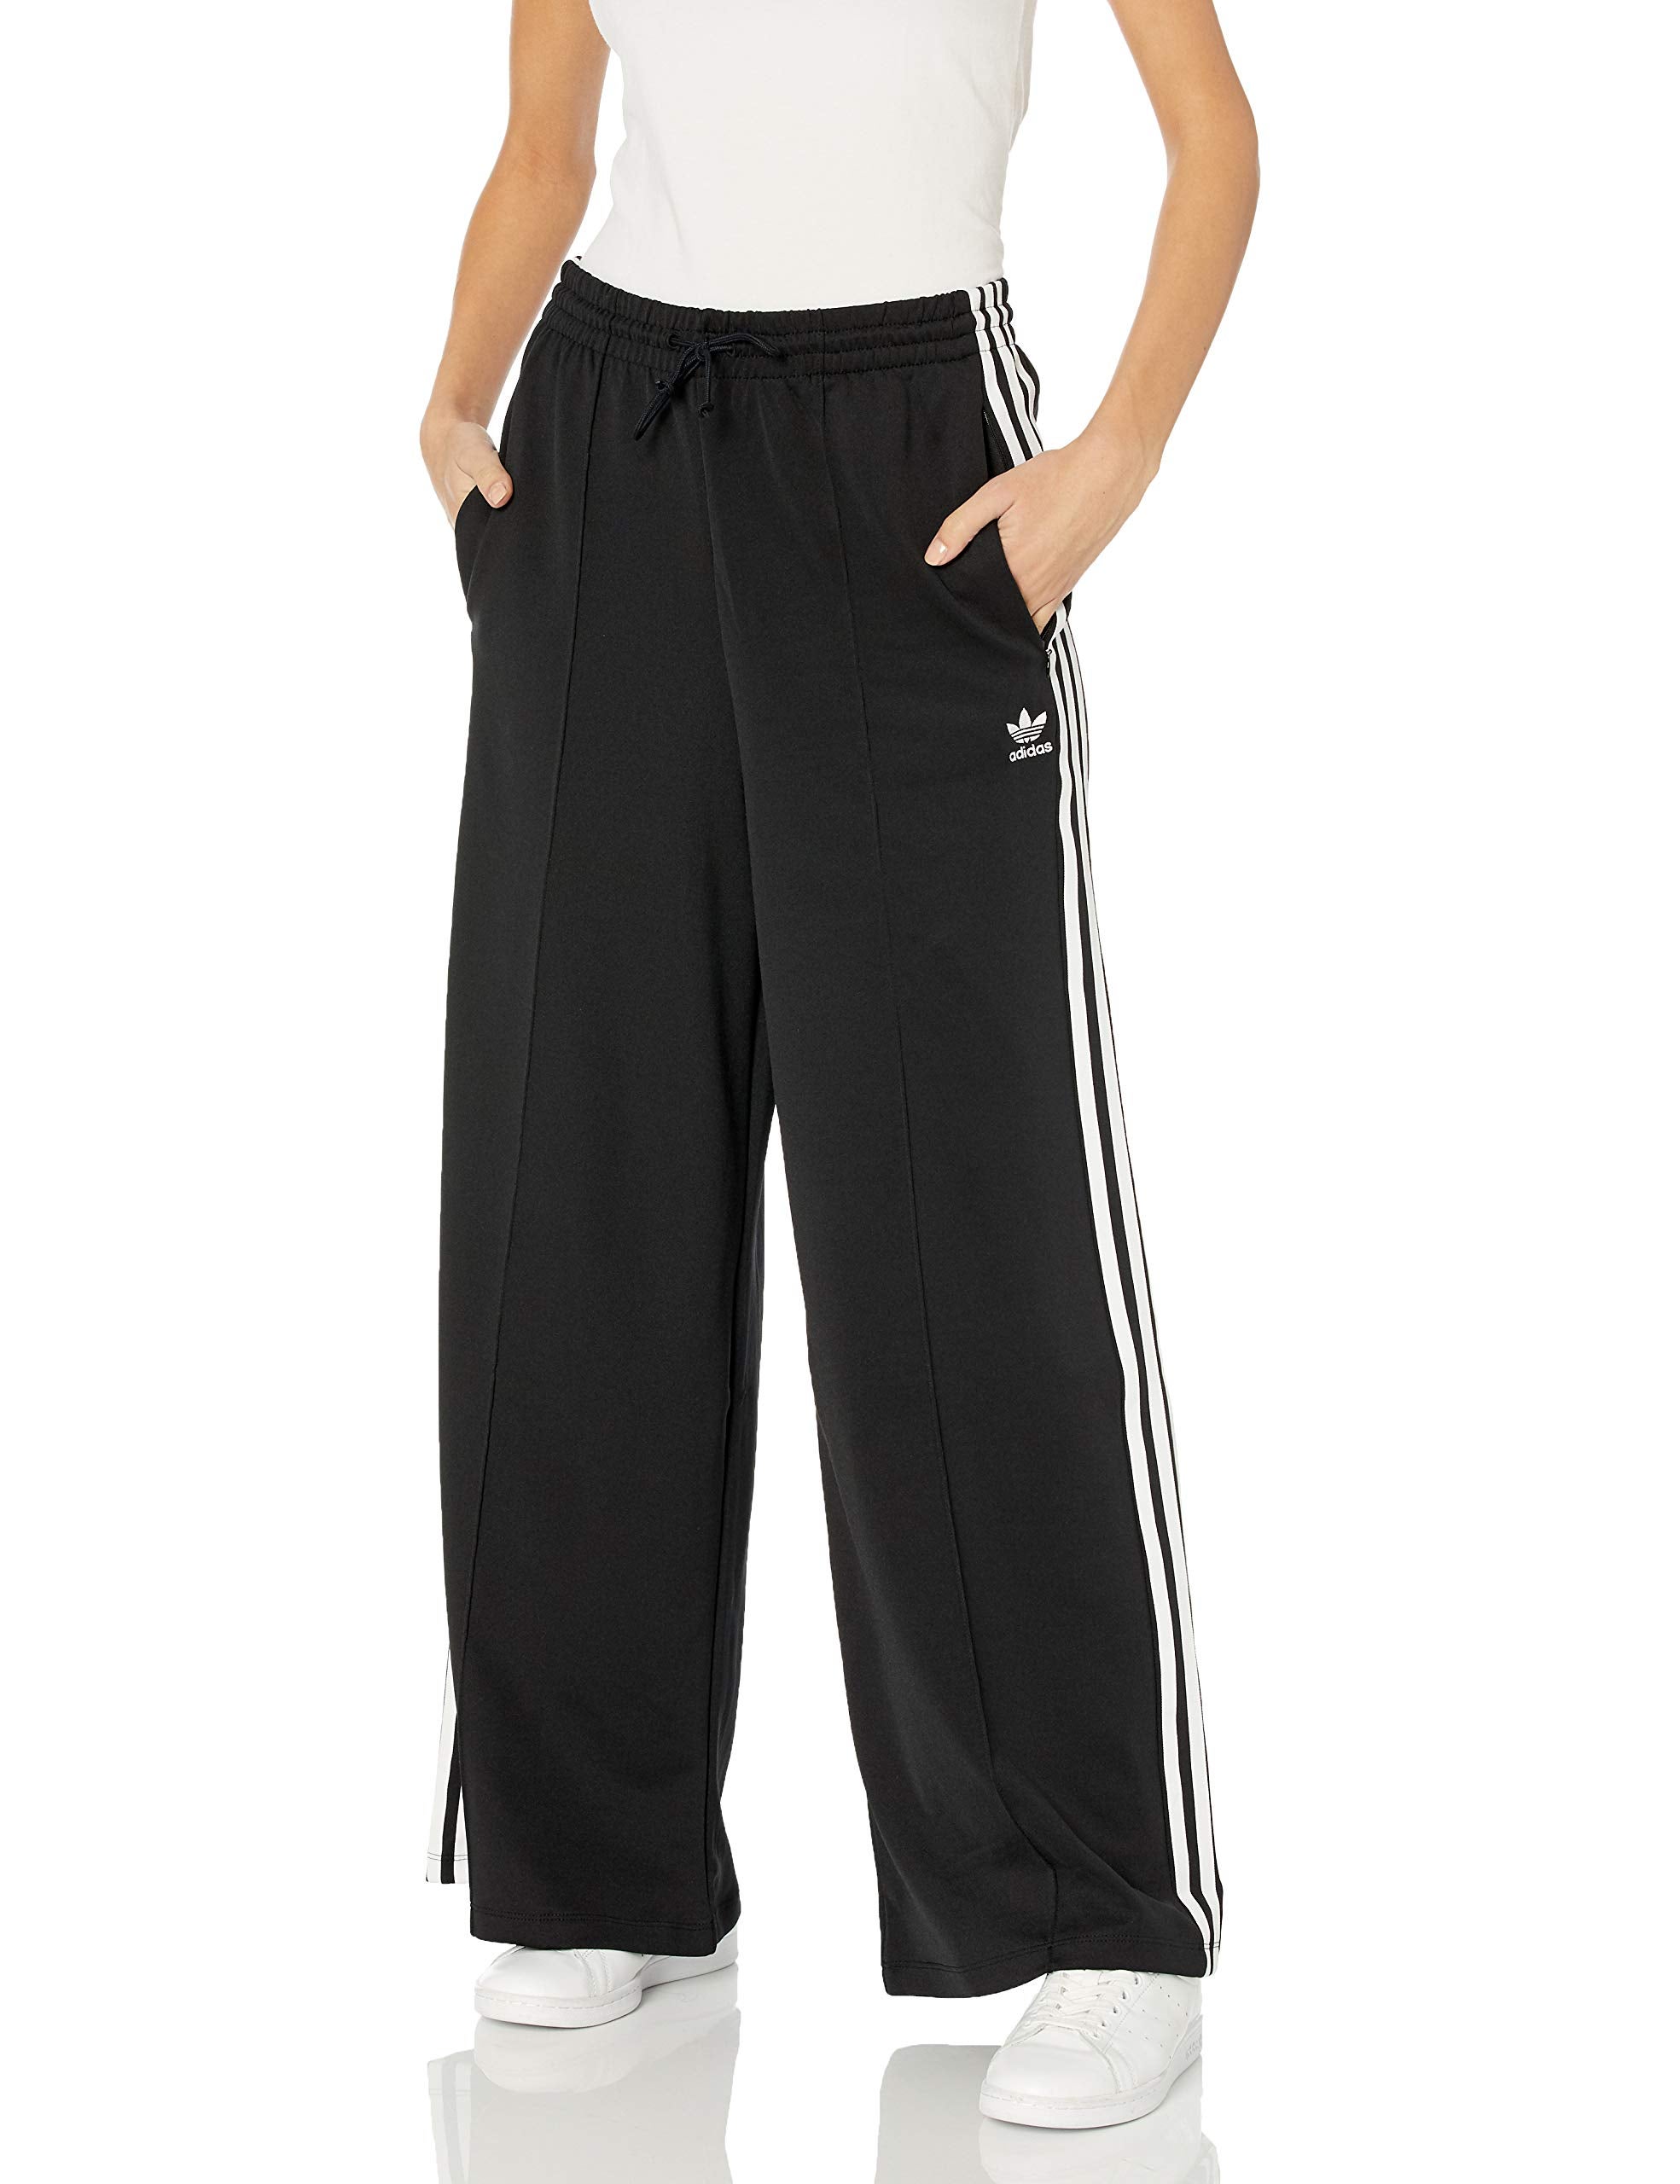 Adidas + Primeblue Relaxed Wide Leg Pants